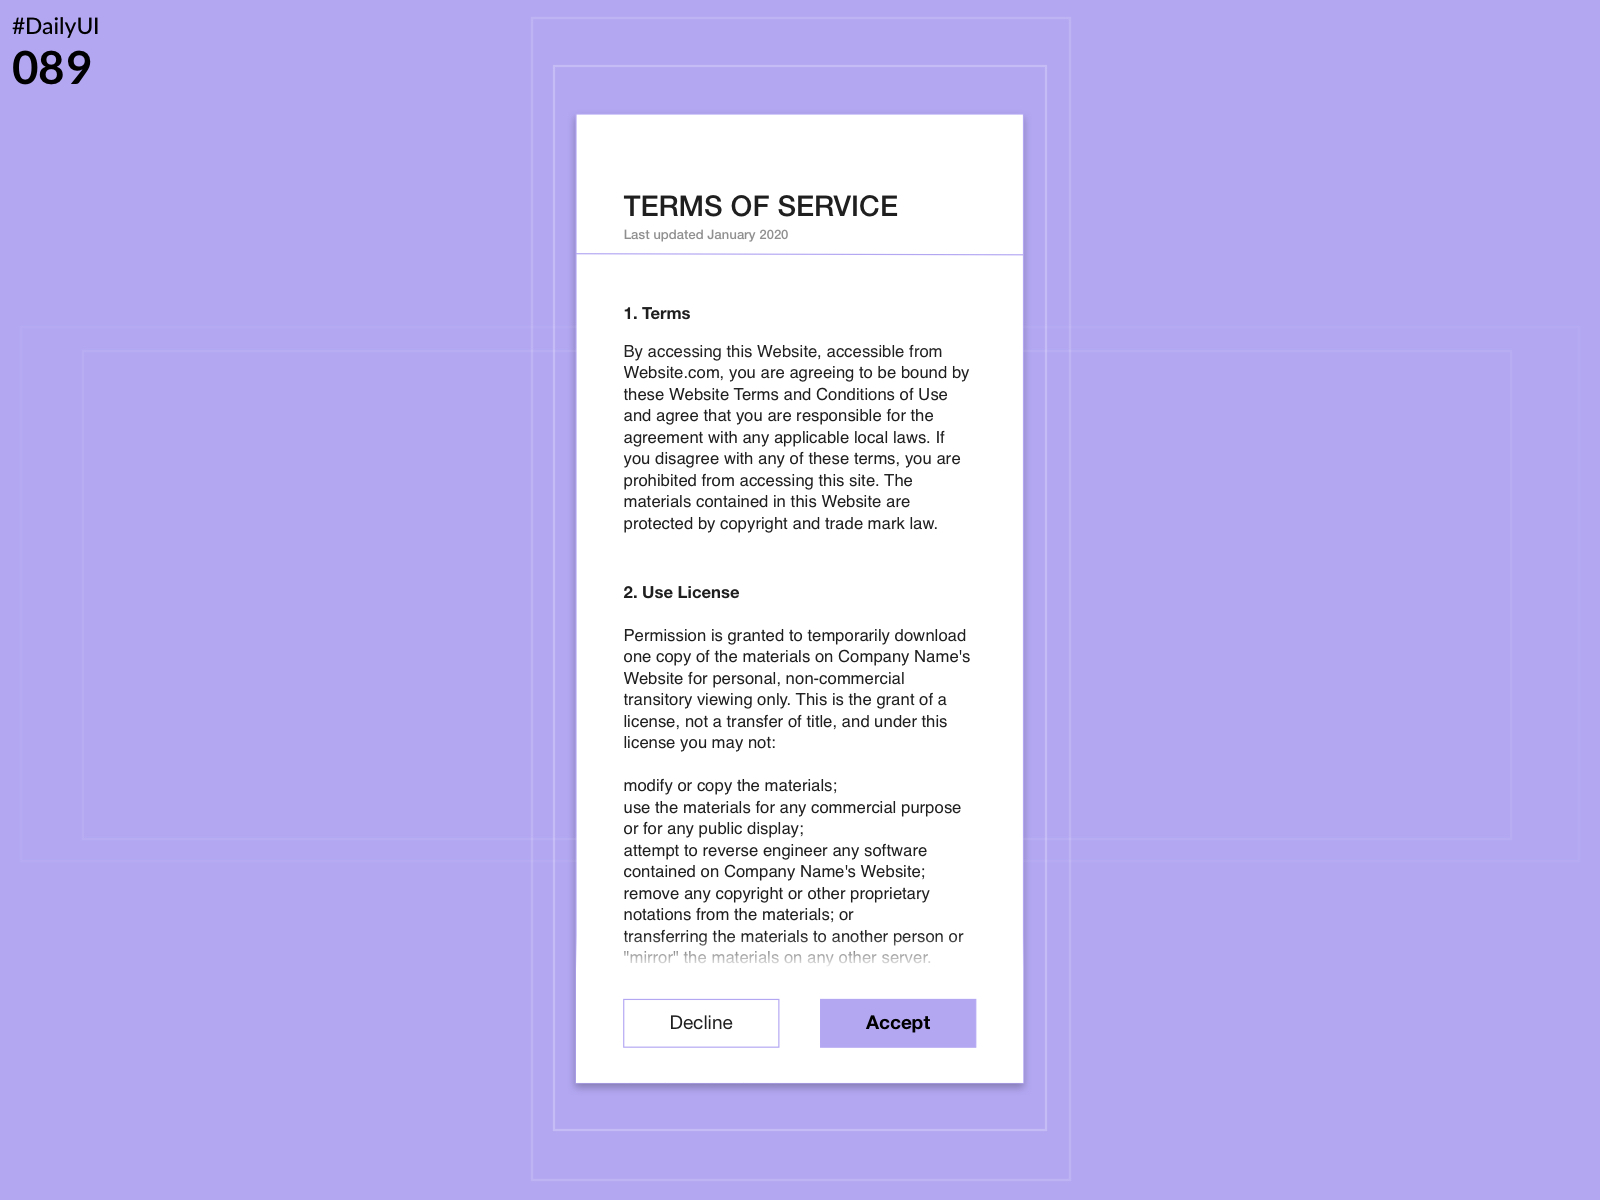 DailyUI Challenge 089 - Terms of Service)